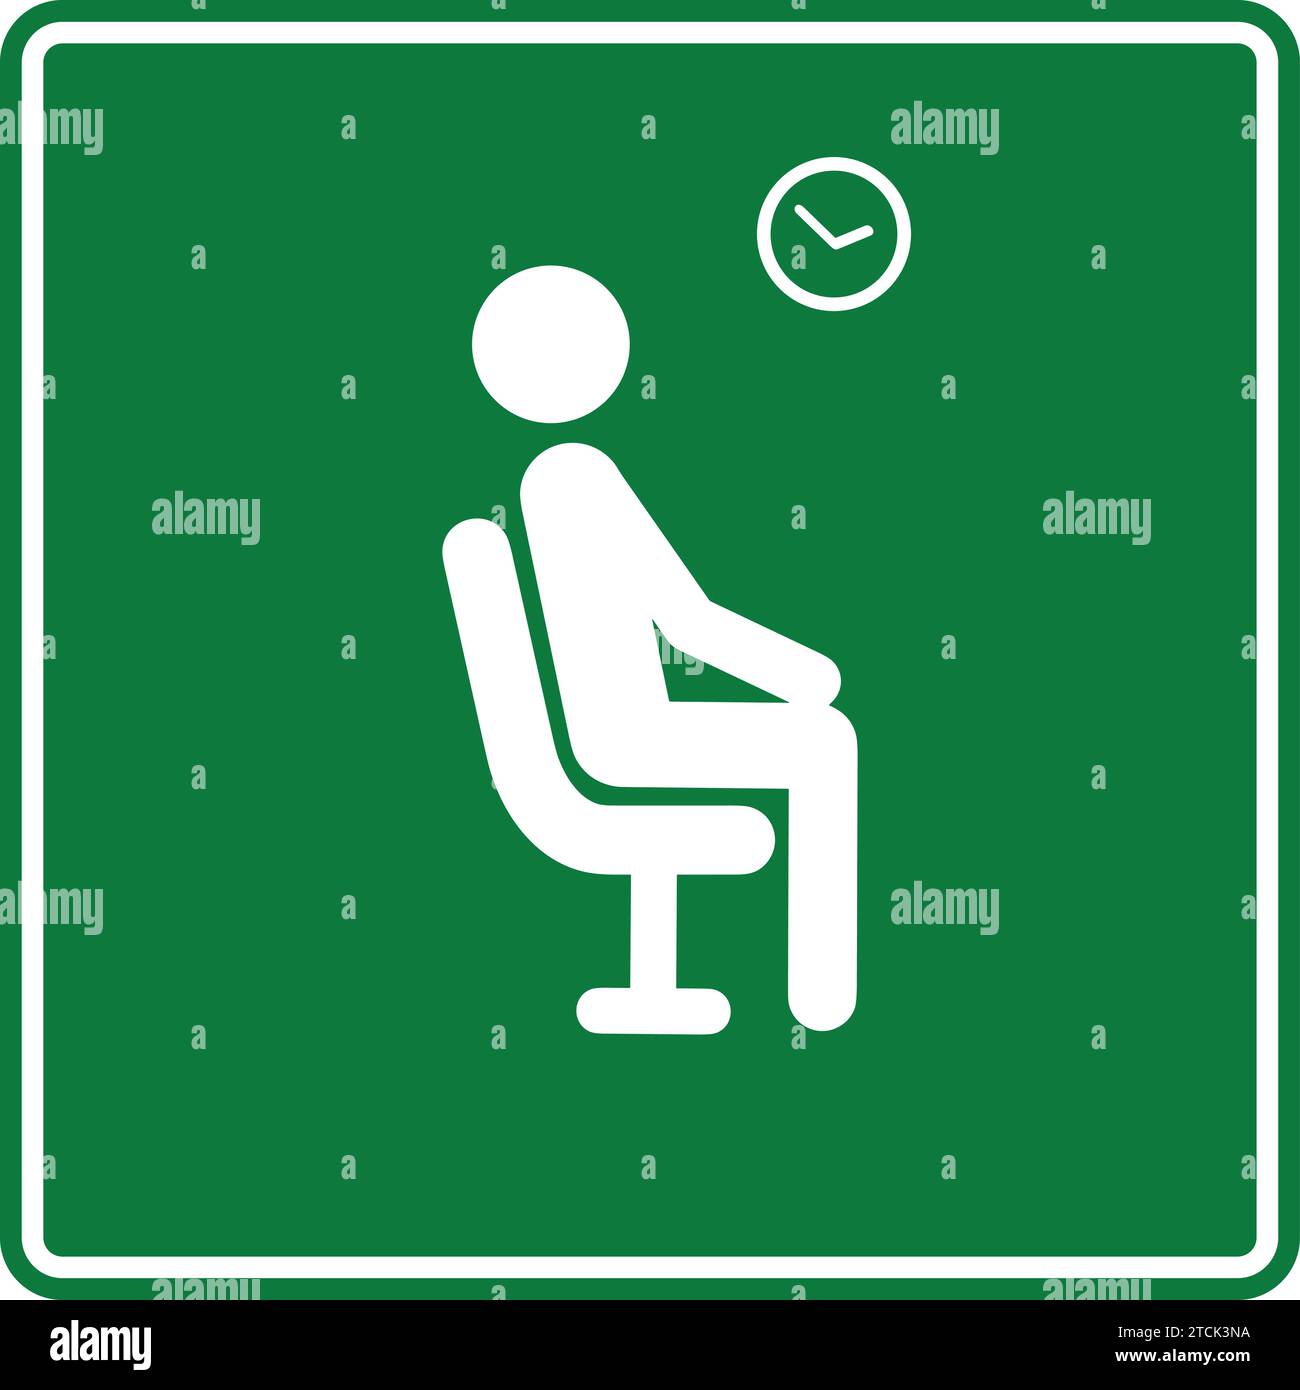 Waiting symbol| Waiting Area sign green color | Waiting room vector | Waiting room Stock Vector